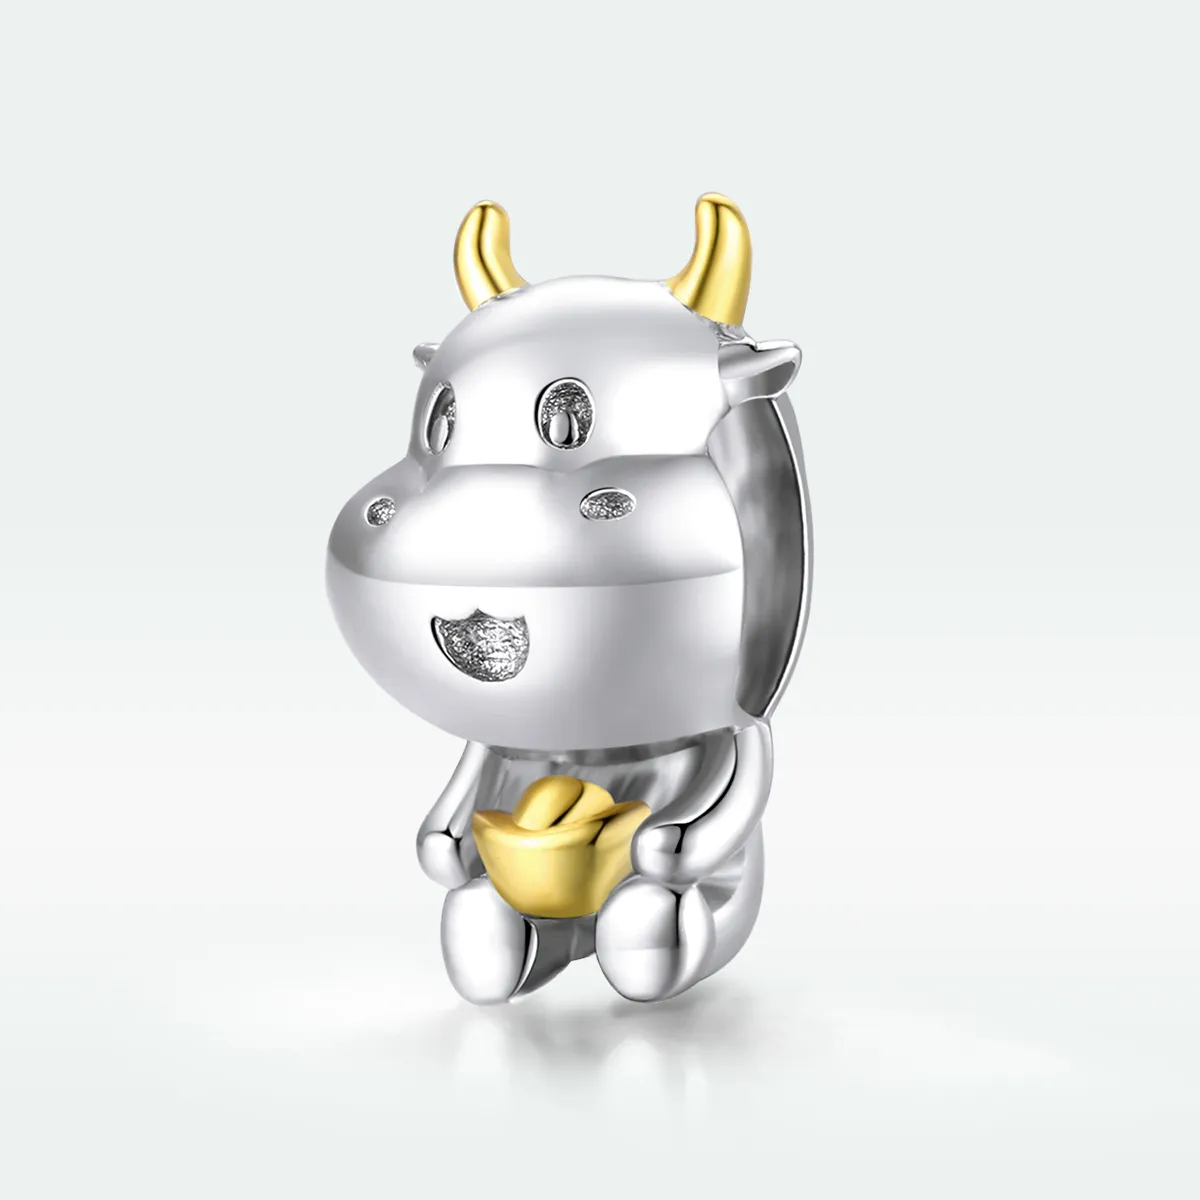 Pandora Style Two Tone Bicolor Lucky Cow Charm - SCC1709